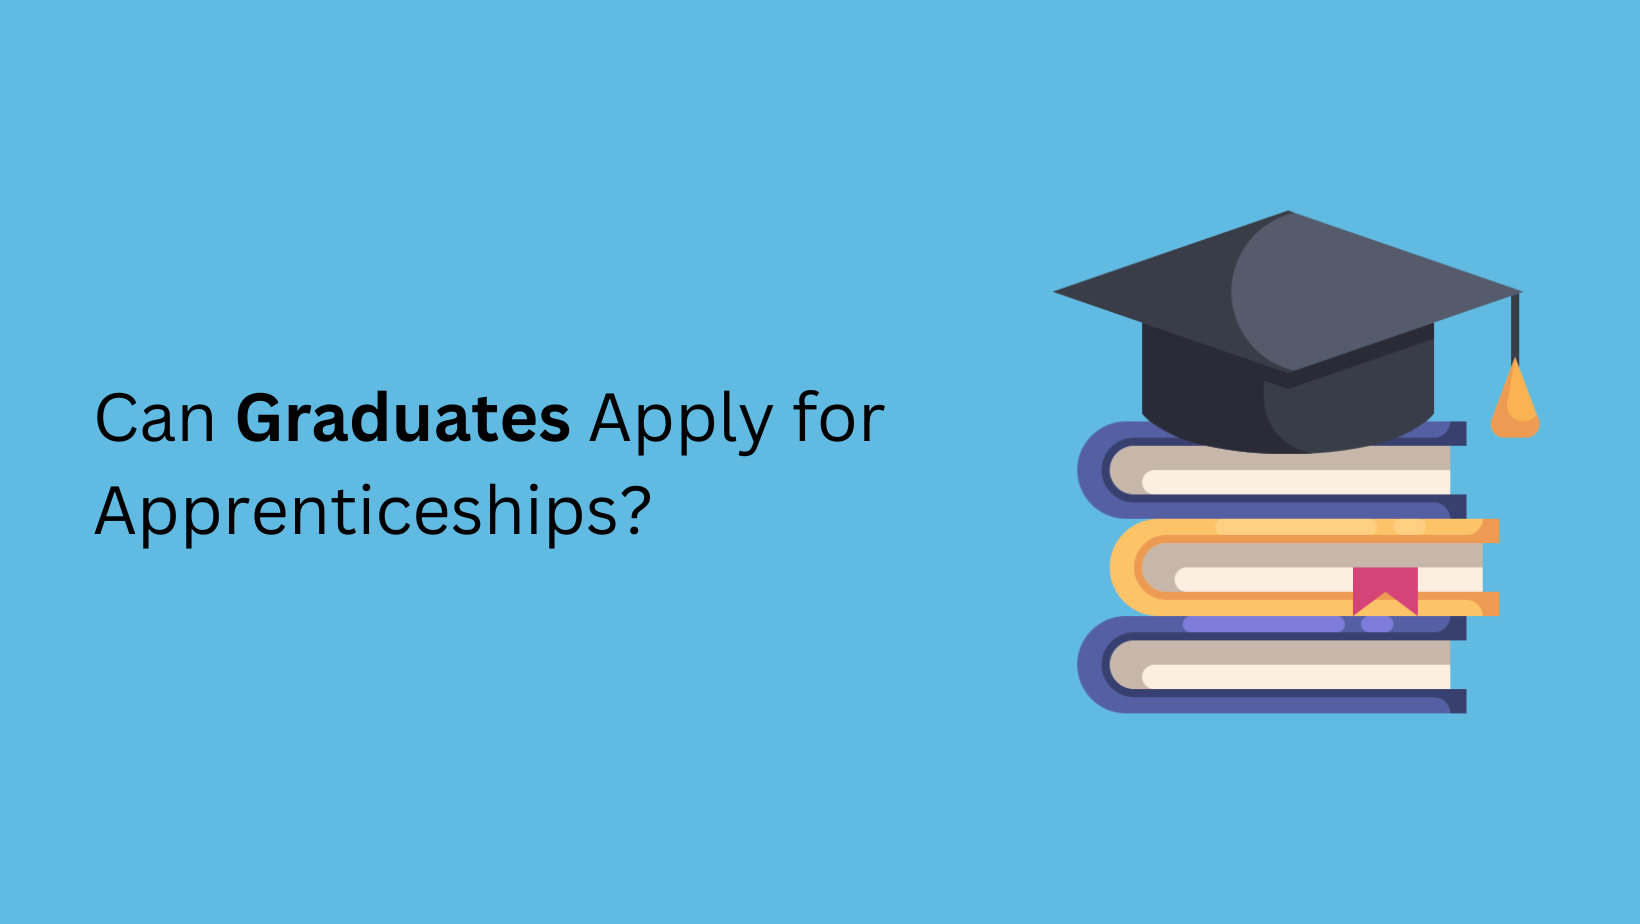 Can Graduates Apply For Apprenticeships